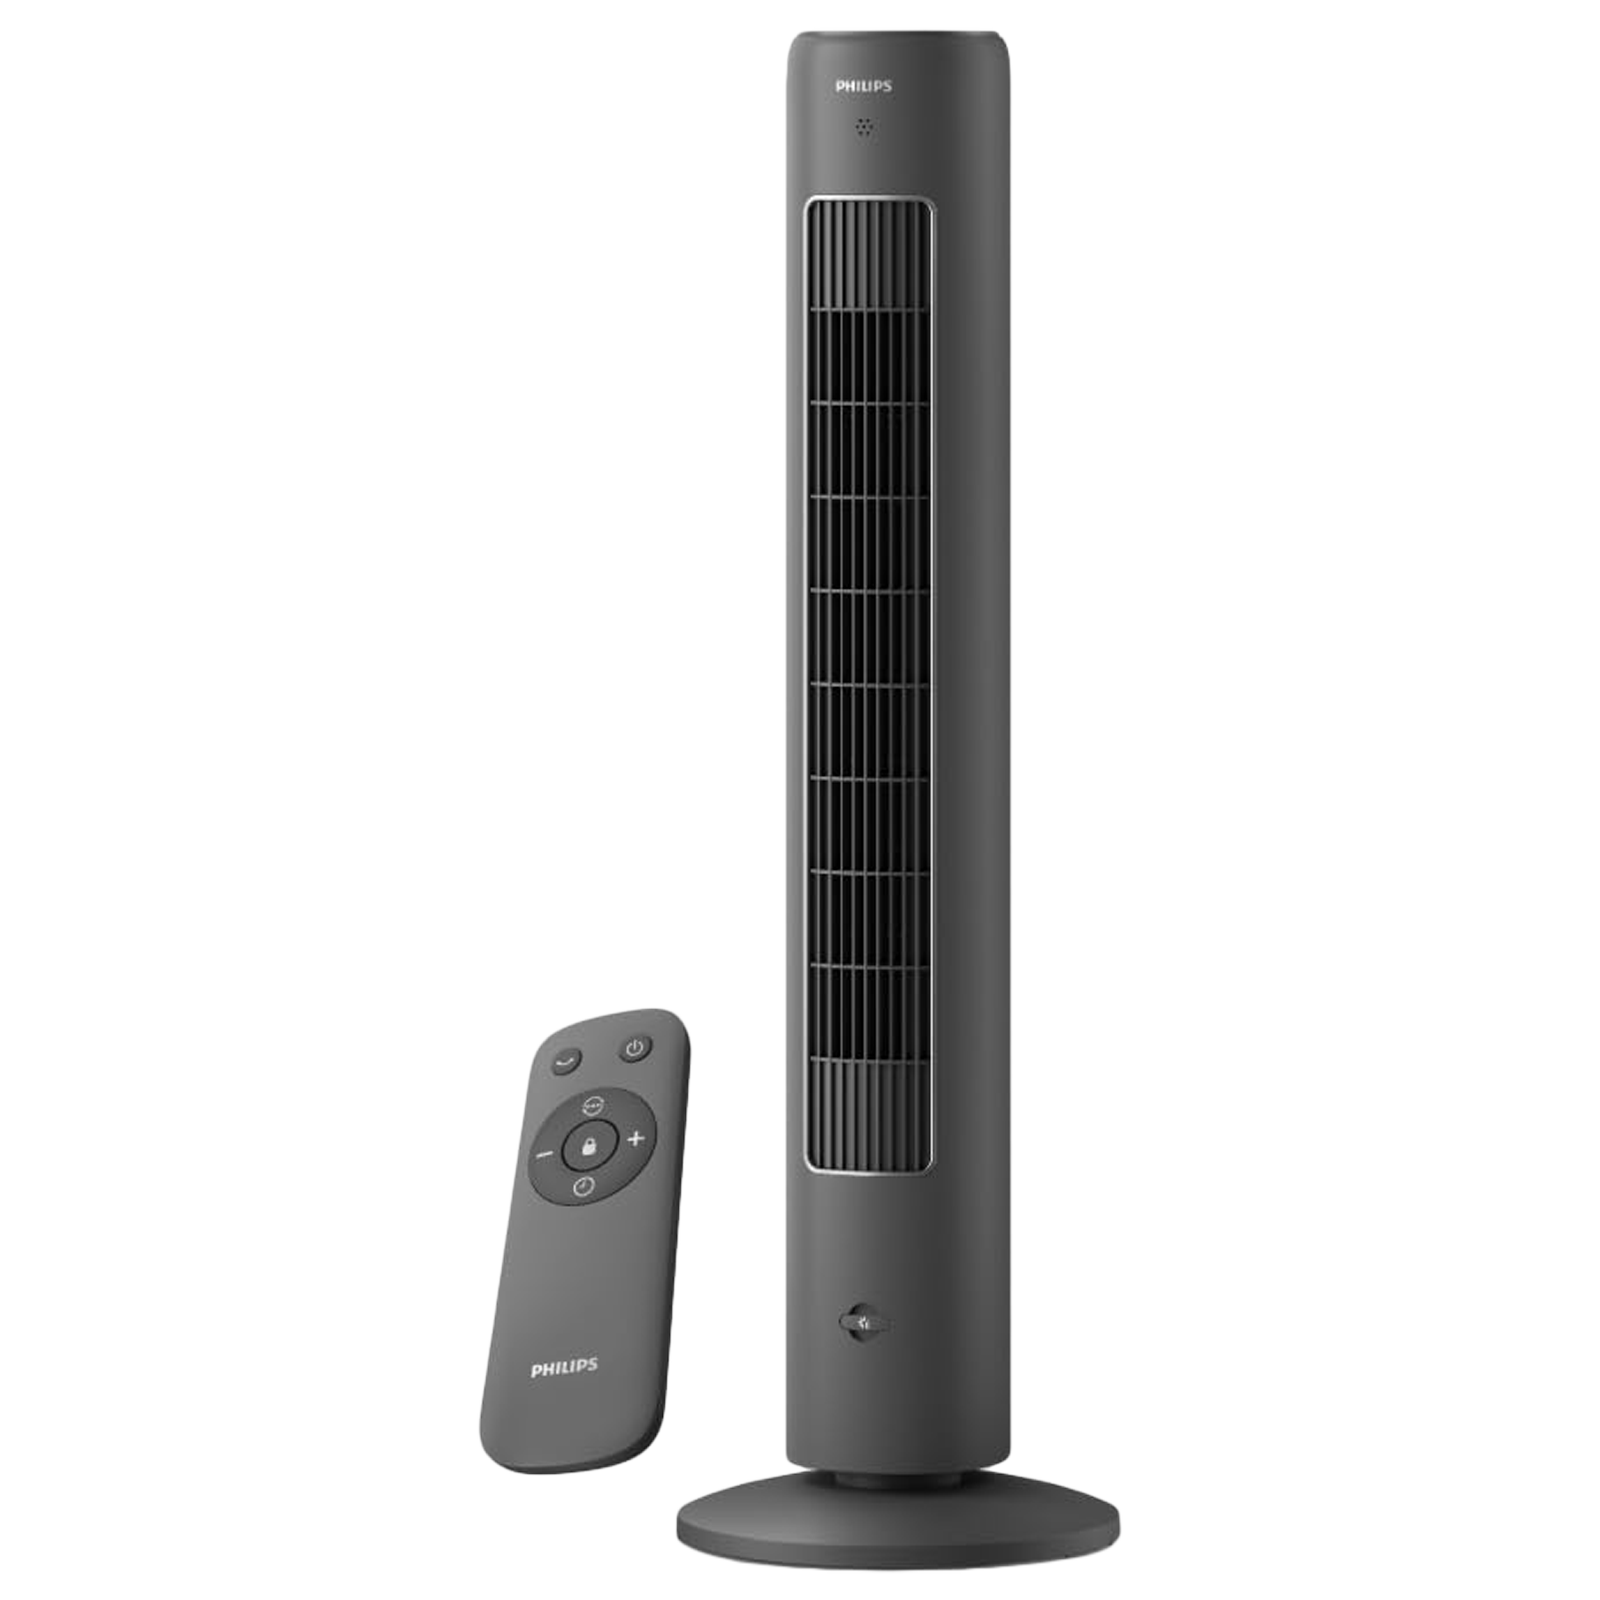 PHILIPS 5000 Series Bladeless 2230 m3/hr Air Delivery Tower Fan with Remote (Silent Operation, Black)